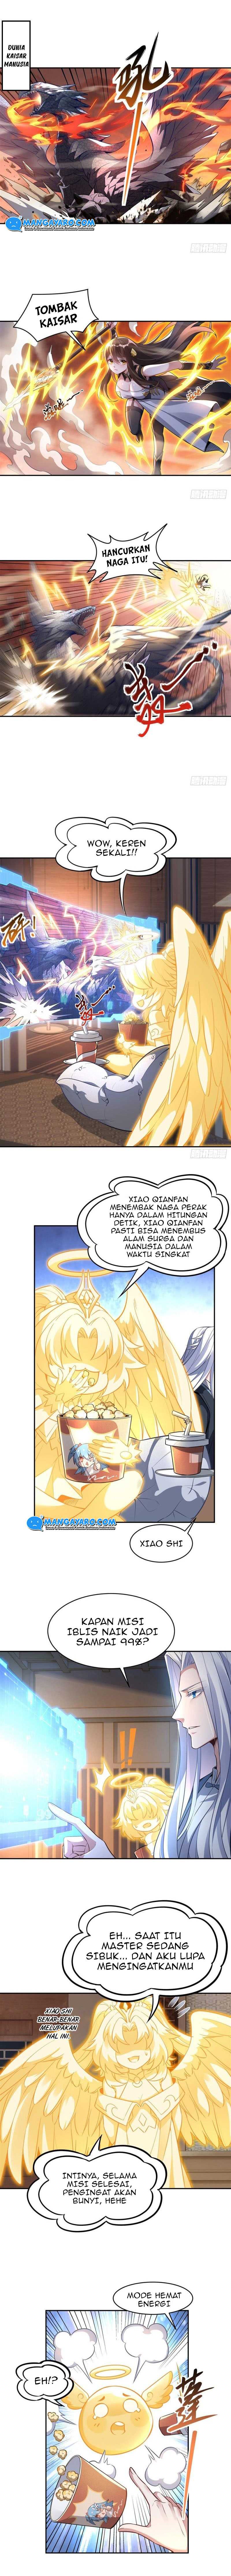 Dilarang COPAS - situs resmi www.mangacanblog.com - Komik my female apprentices are all big shots from the future 071 - chapter 71 72 Indonesia my female apprentices are all big shots from the future 071 - chapter 71 Terbaru 1|Baca Manga Komik Indonesia|Mangacan